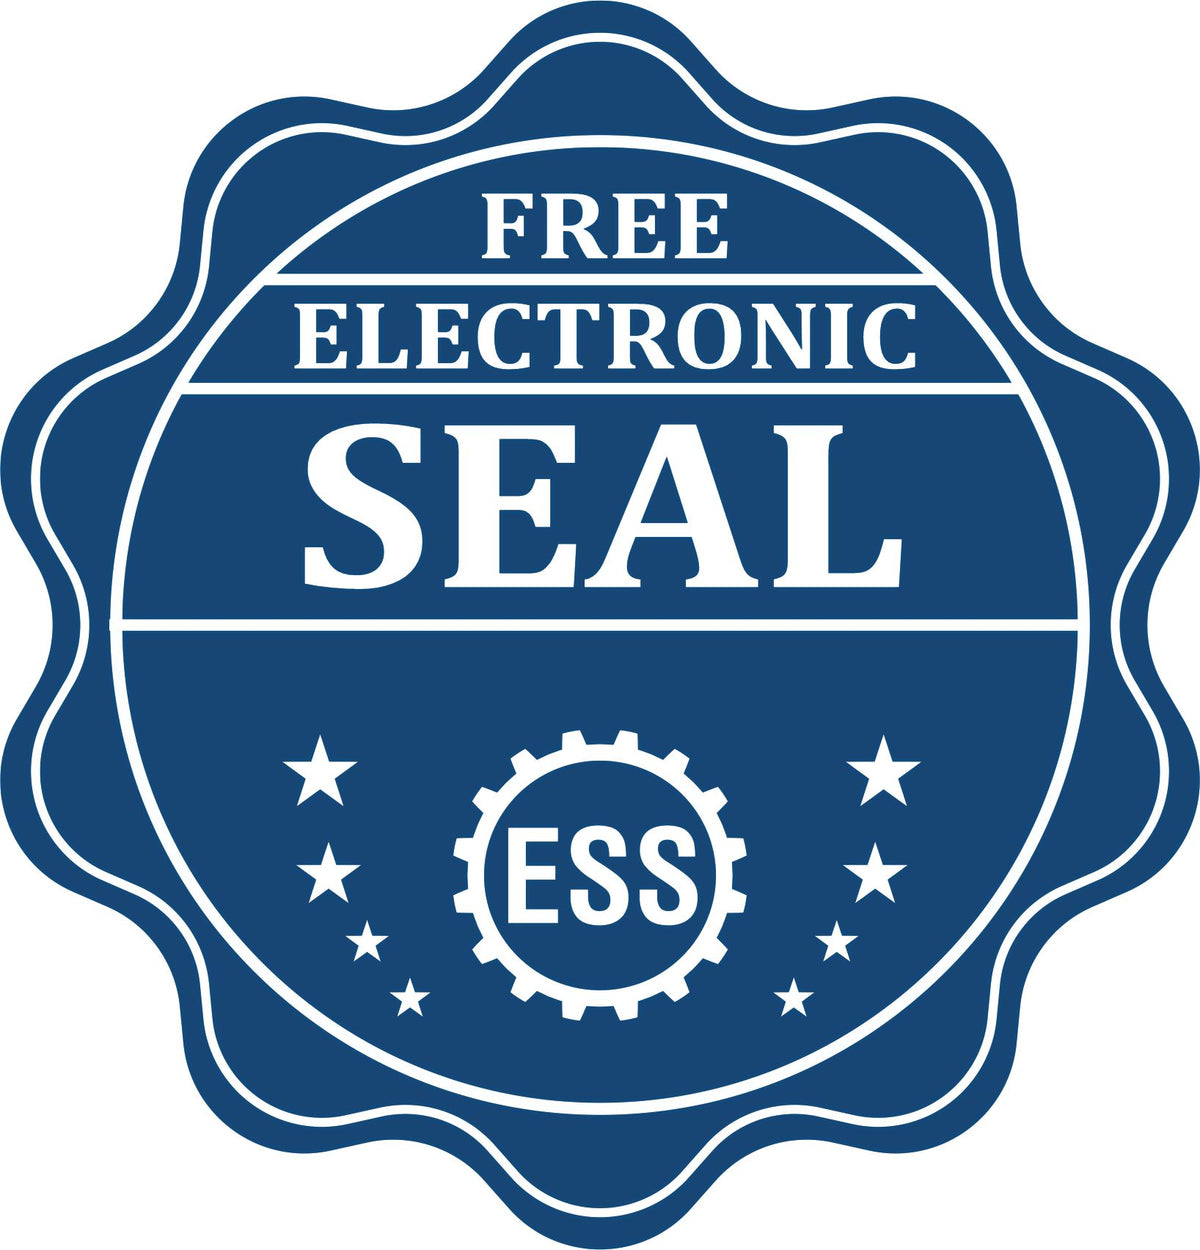 A badge showing a free electronic seal for the State of Illinois Extended Long Reach Engineer Seal with stars and the ESS gear on the emblem.